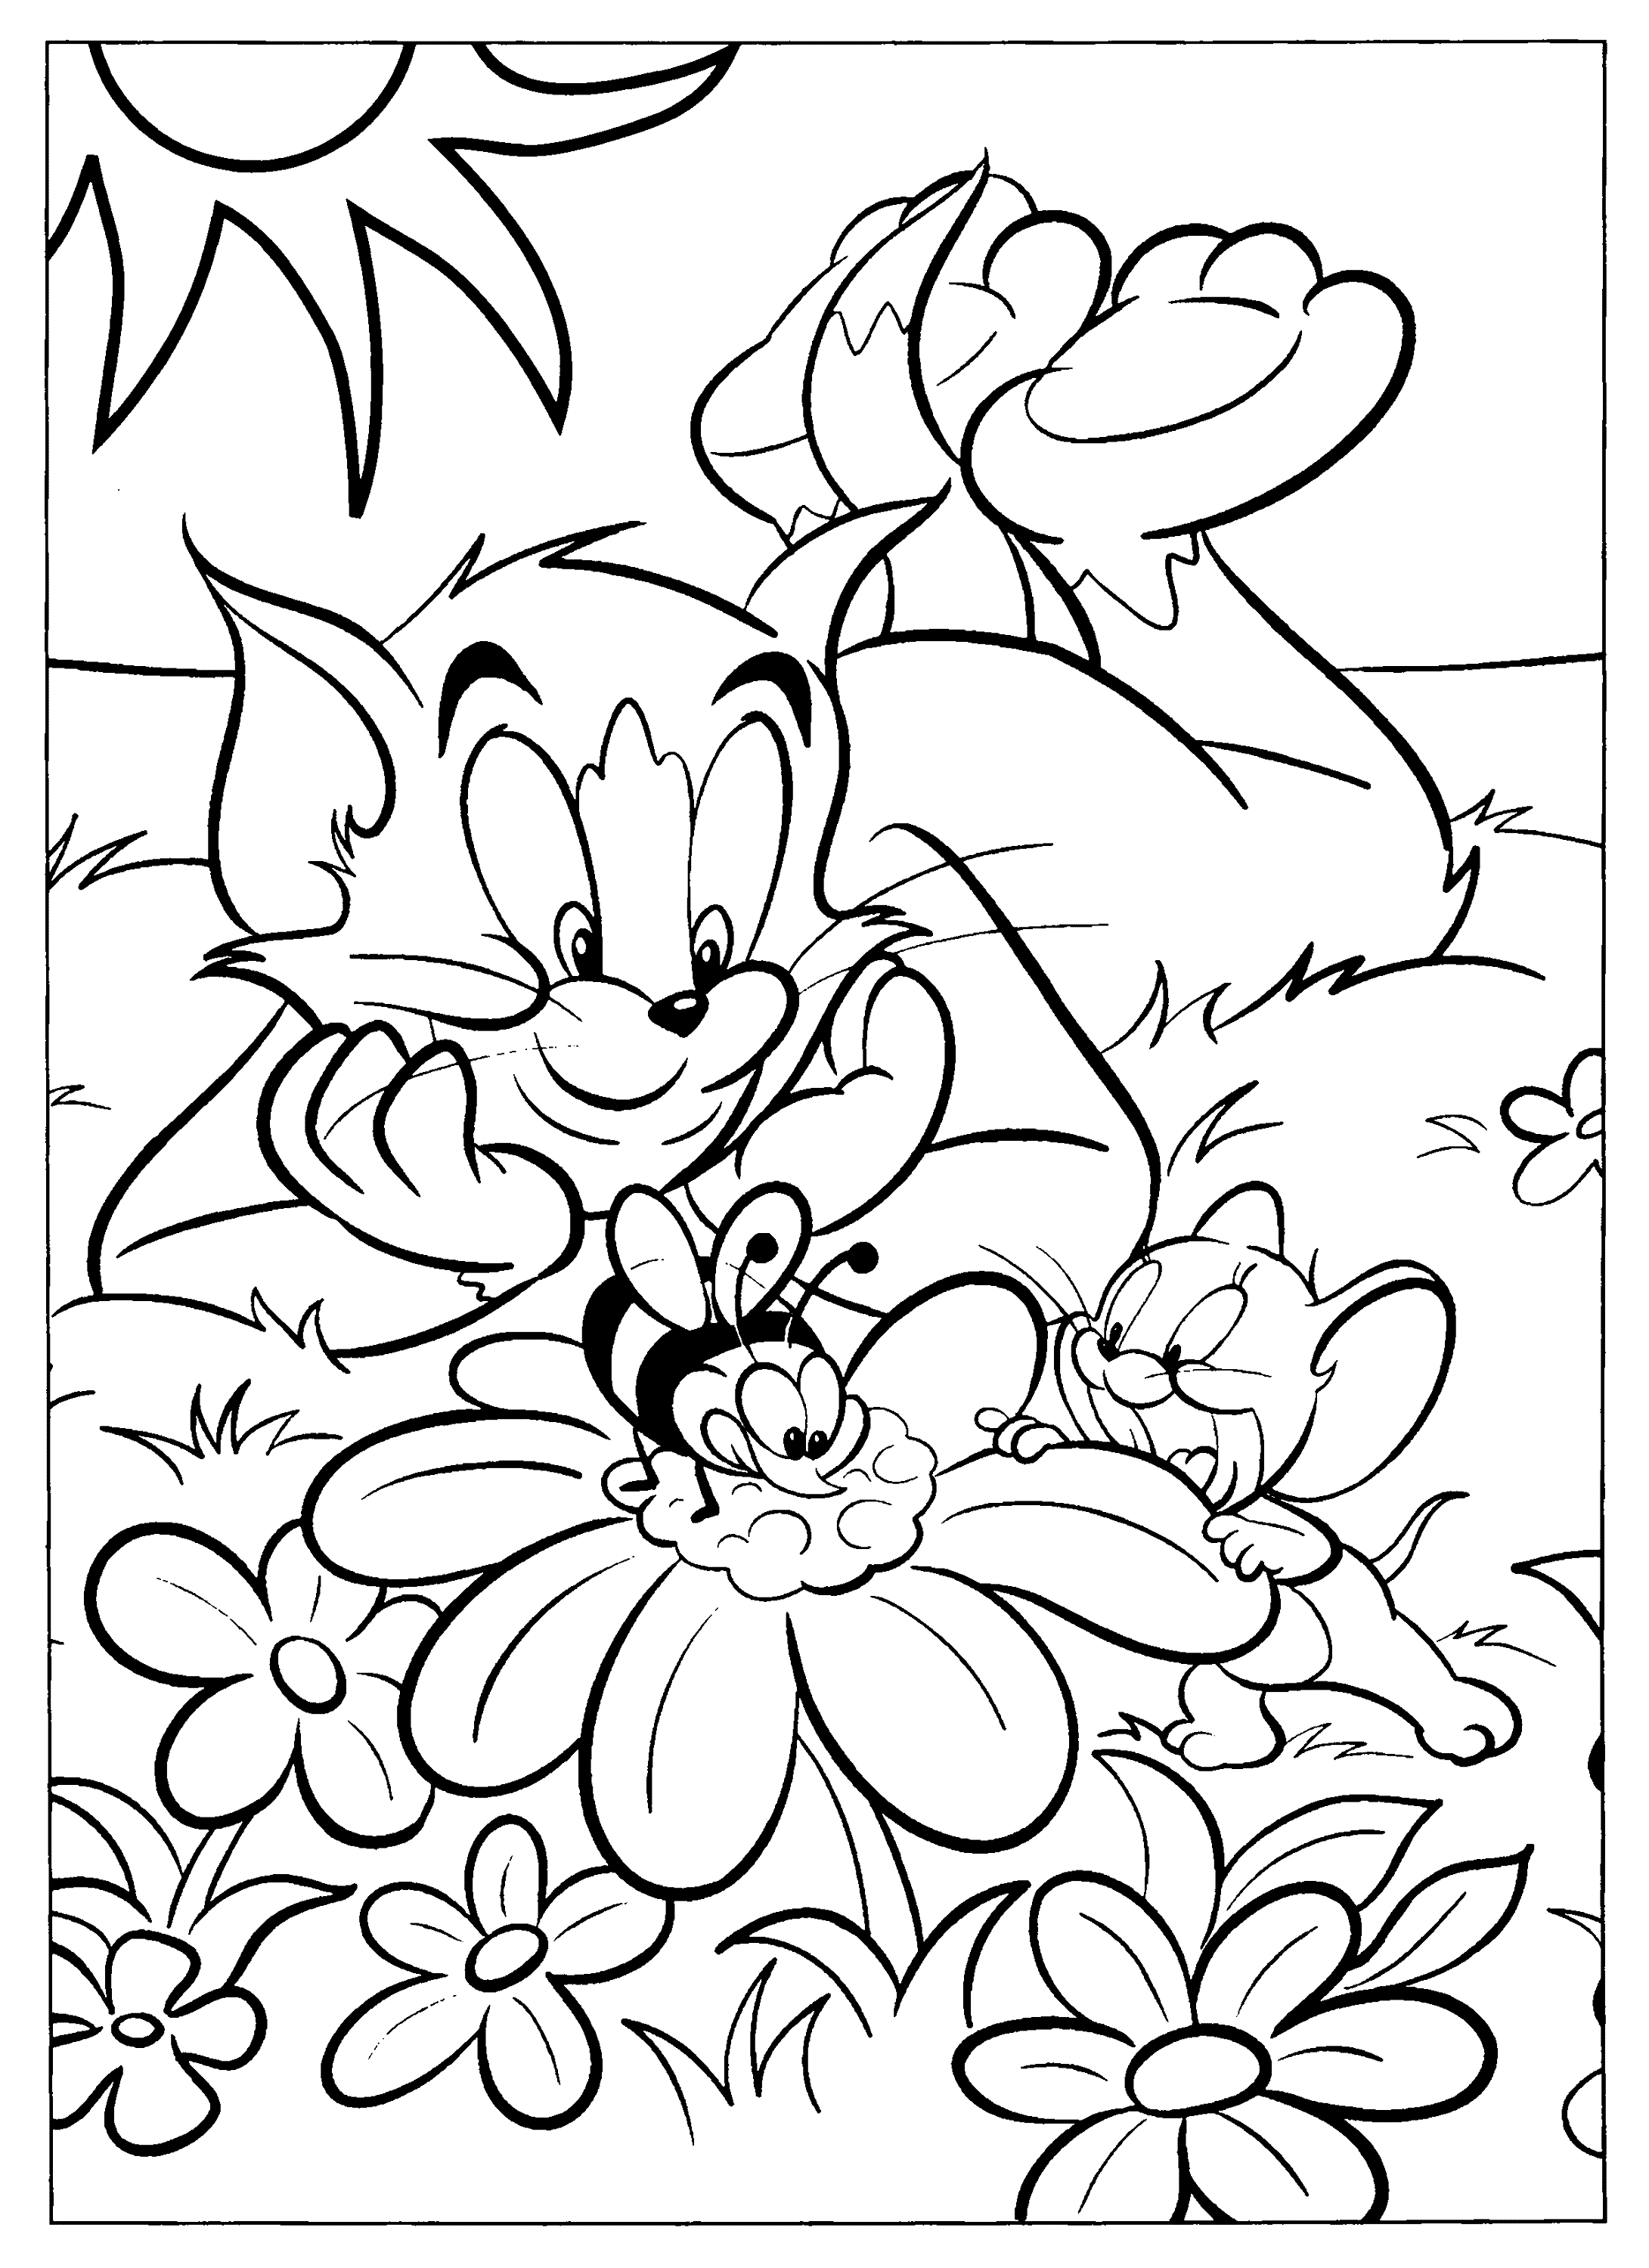 coloring book pages tom